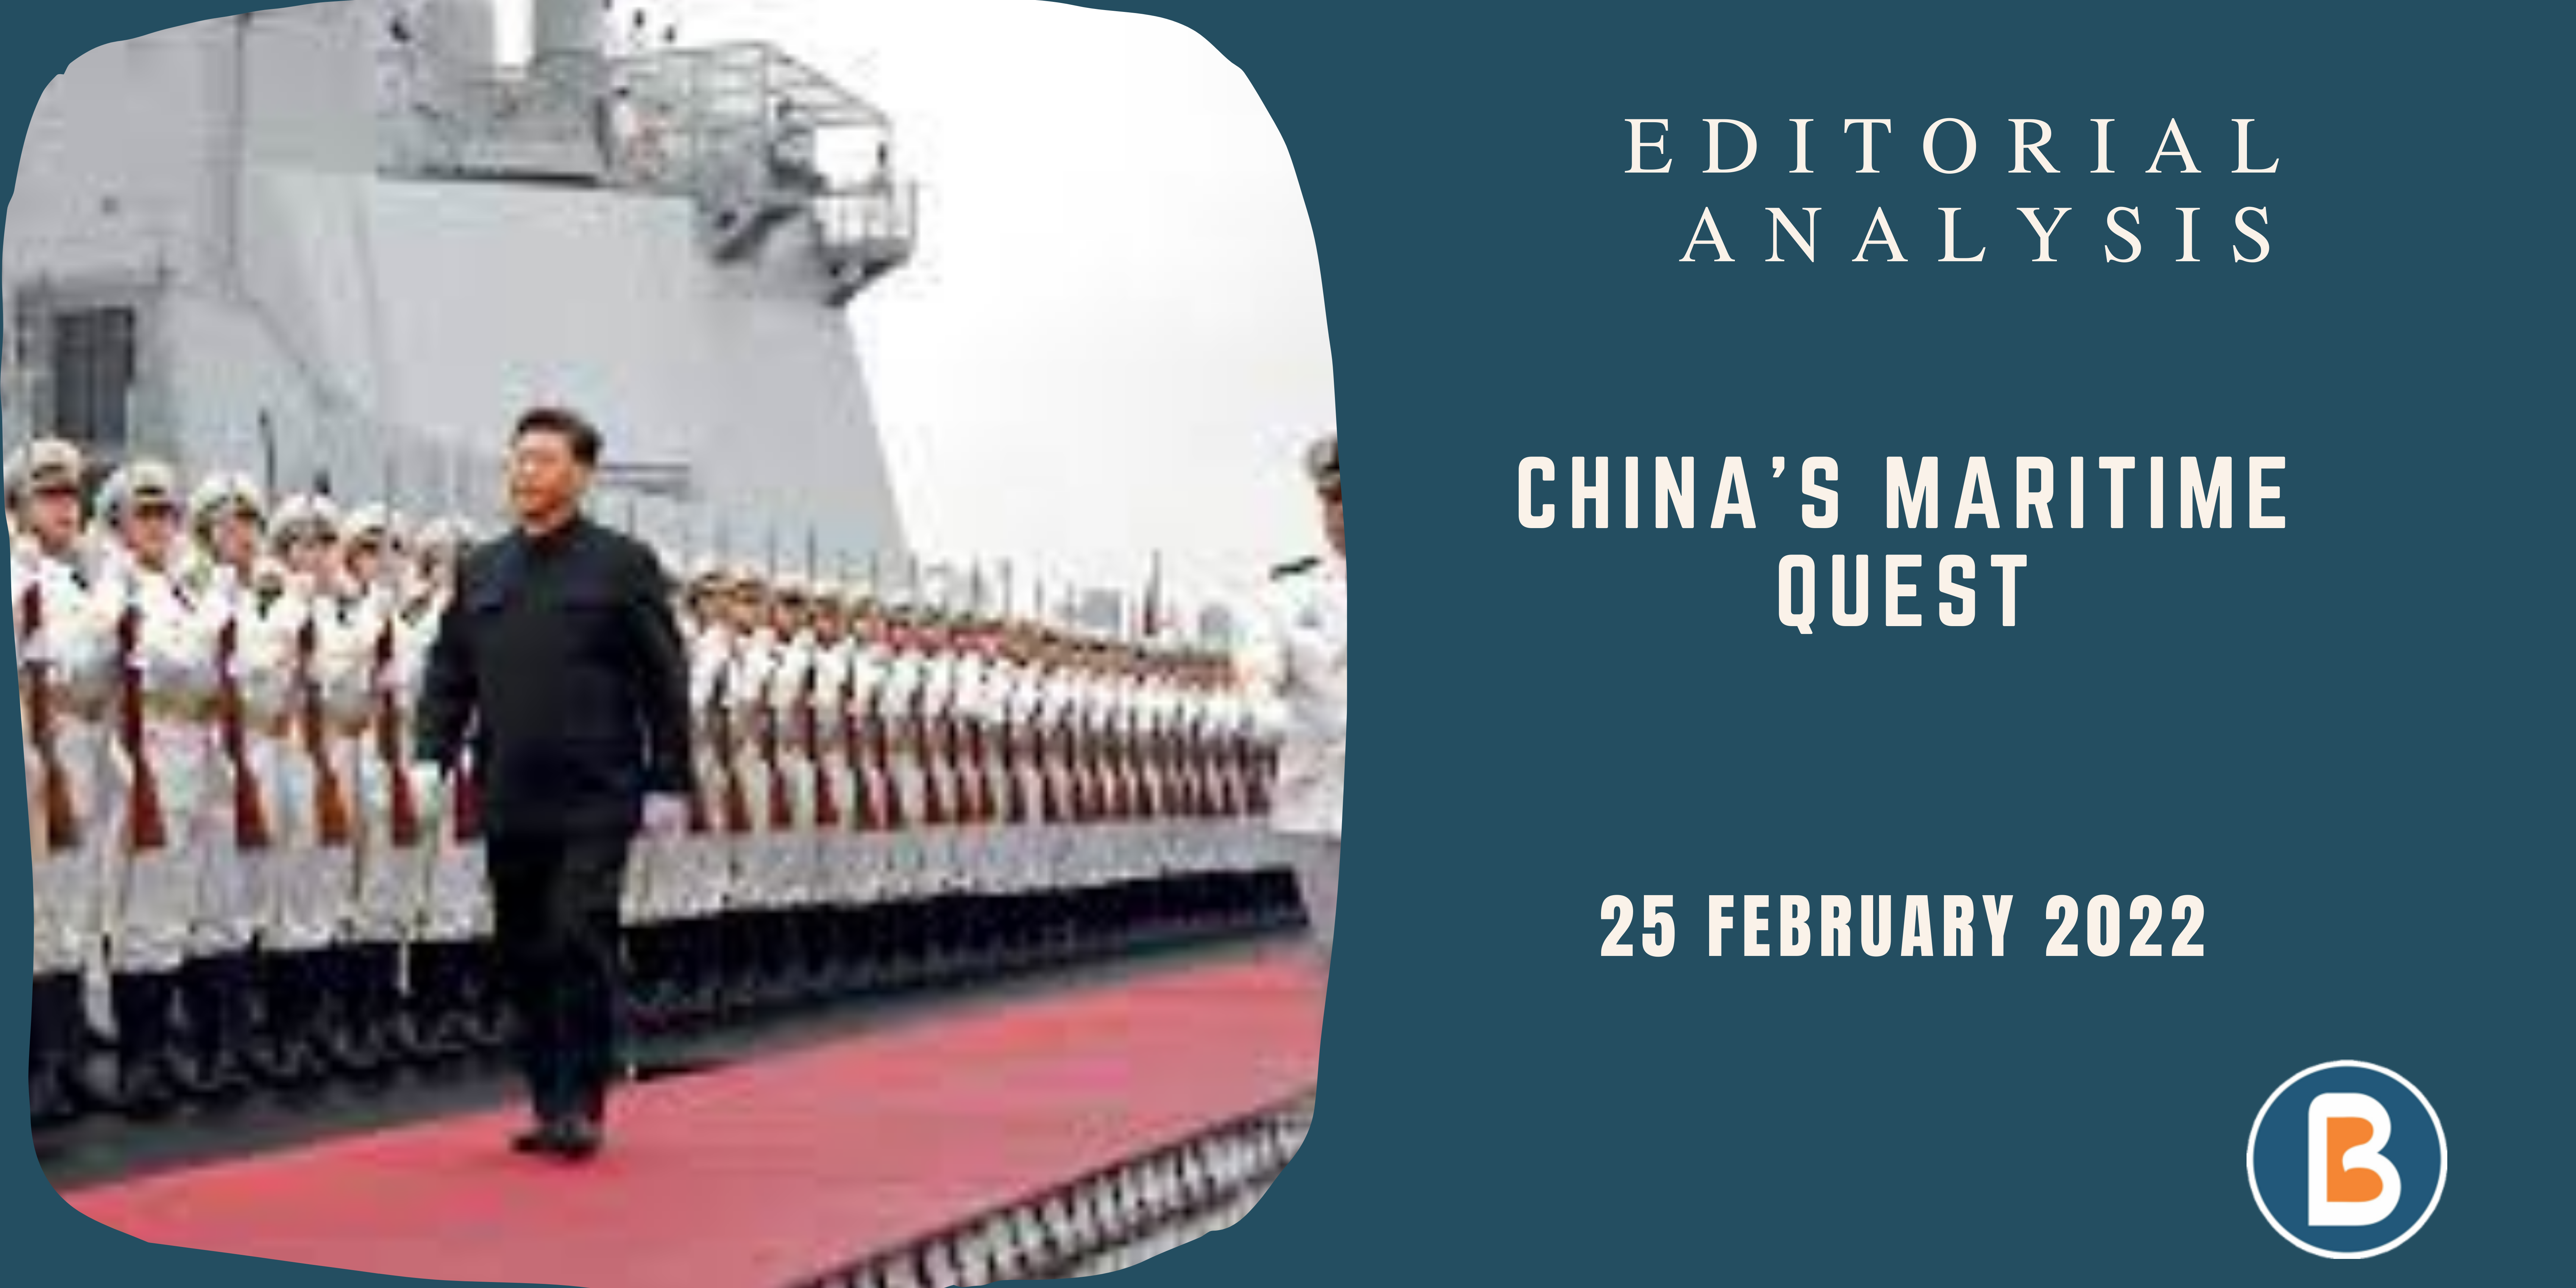 Editorial Analysis for IAS - China’s Maritime Quest